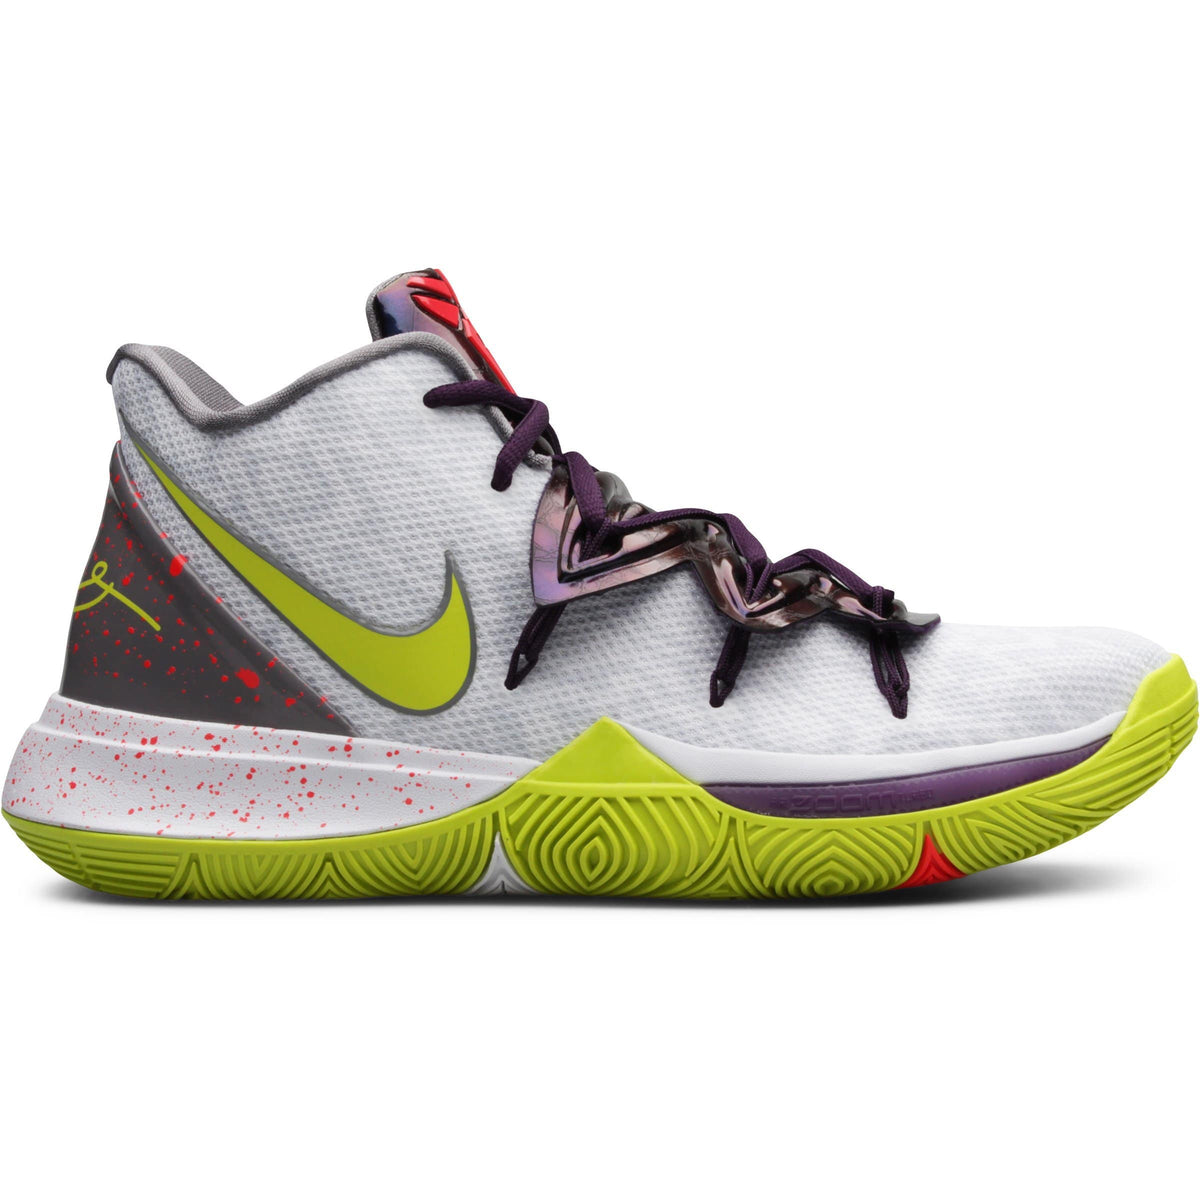 Concepts Nike Kyrie 5 Ikhet CI9961 900 Release Date